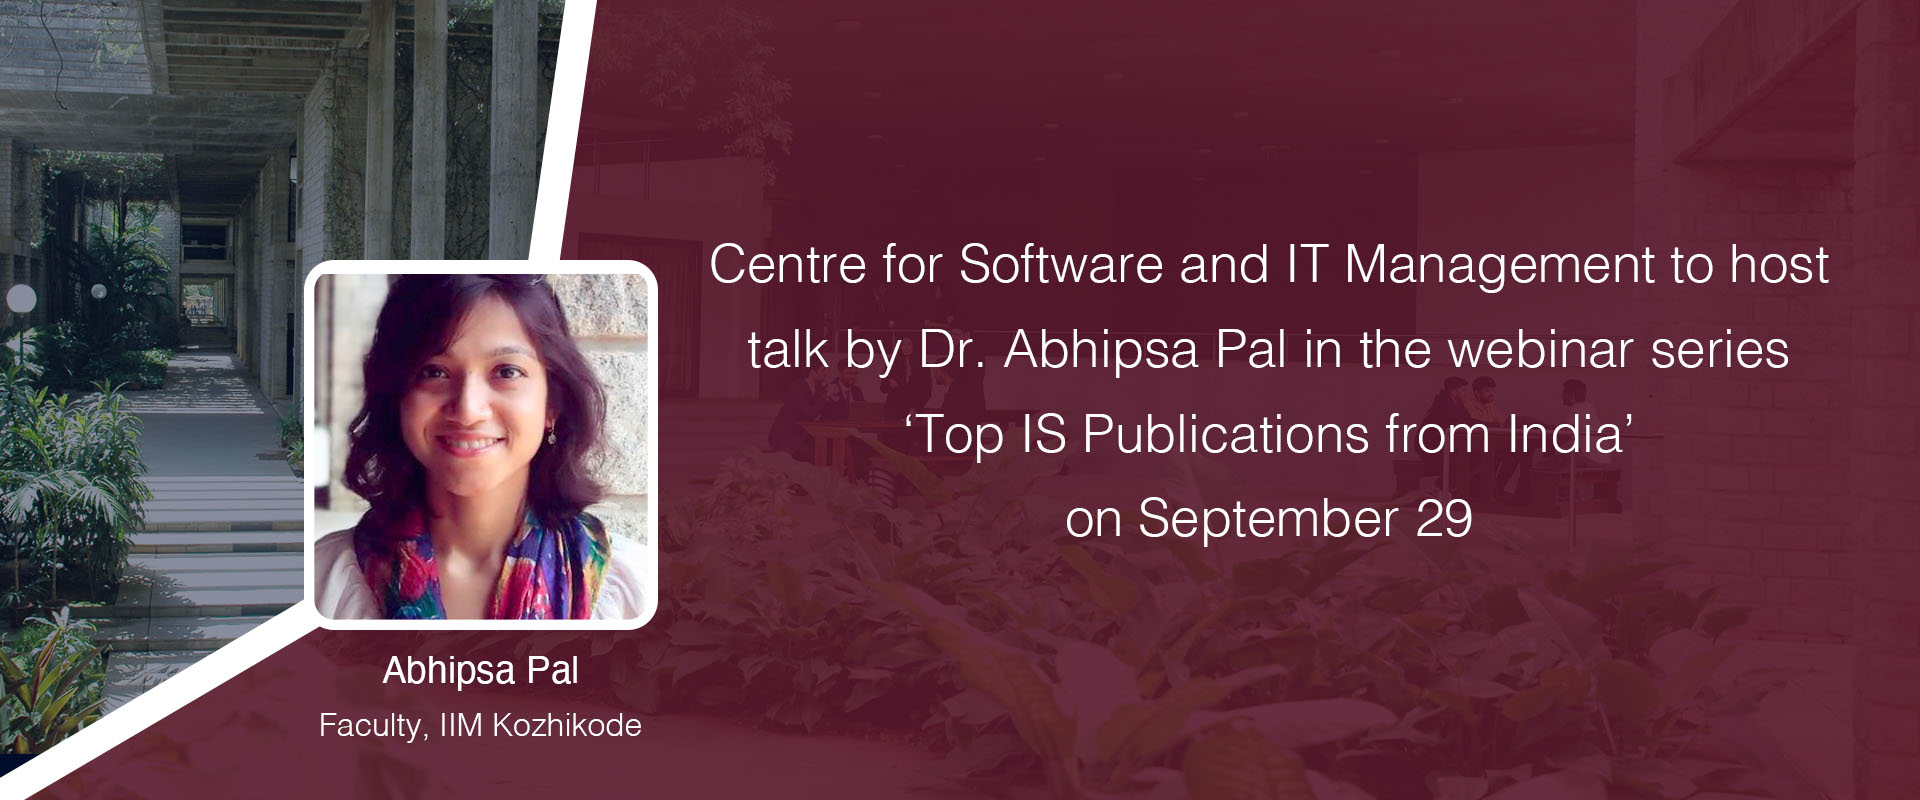 Centre for Software and IT Management to host talk by Dr. Abhipsa Pal in the webinar series ‘Top IS Publications from India’ on September 29